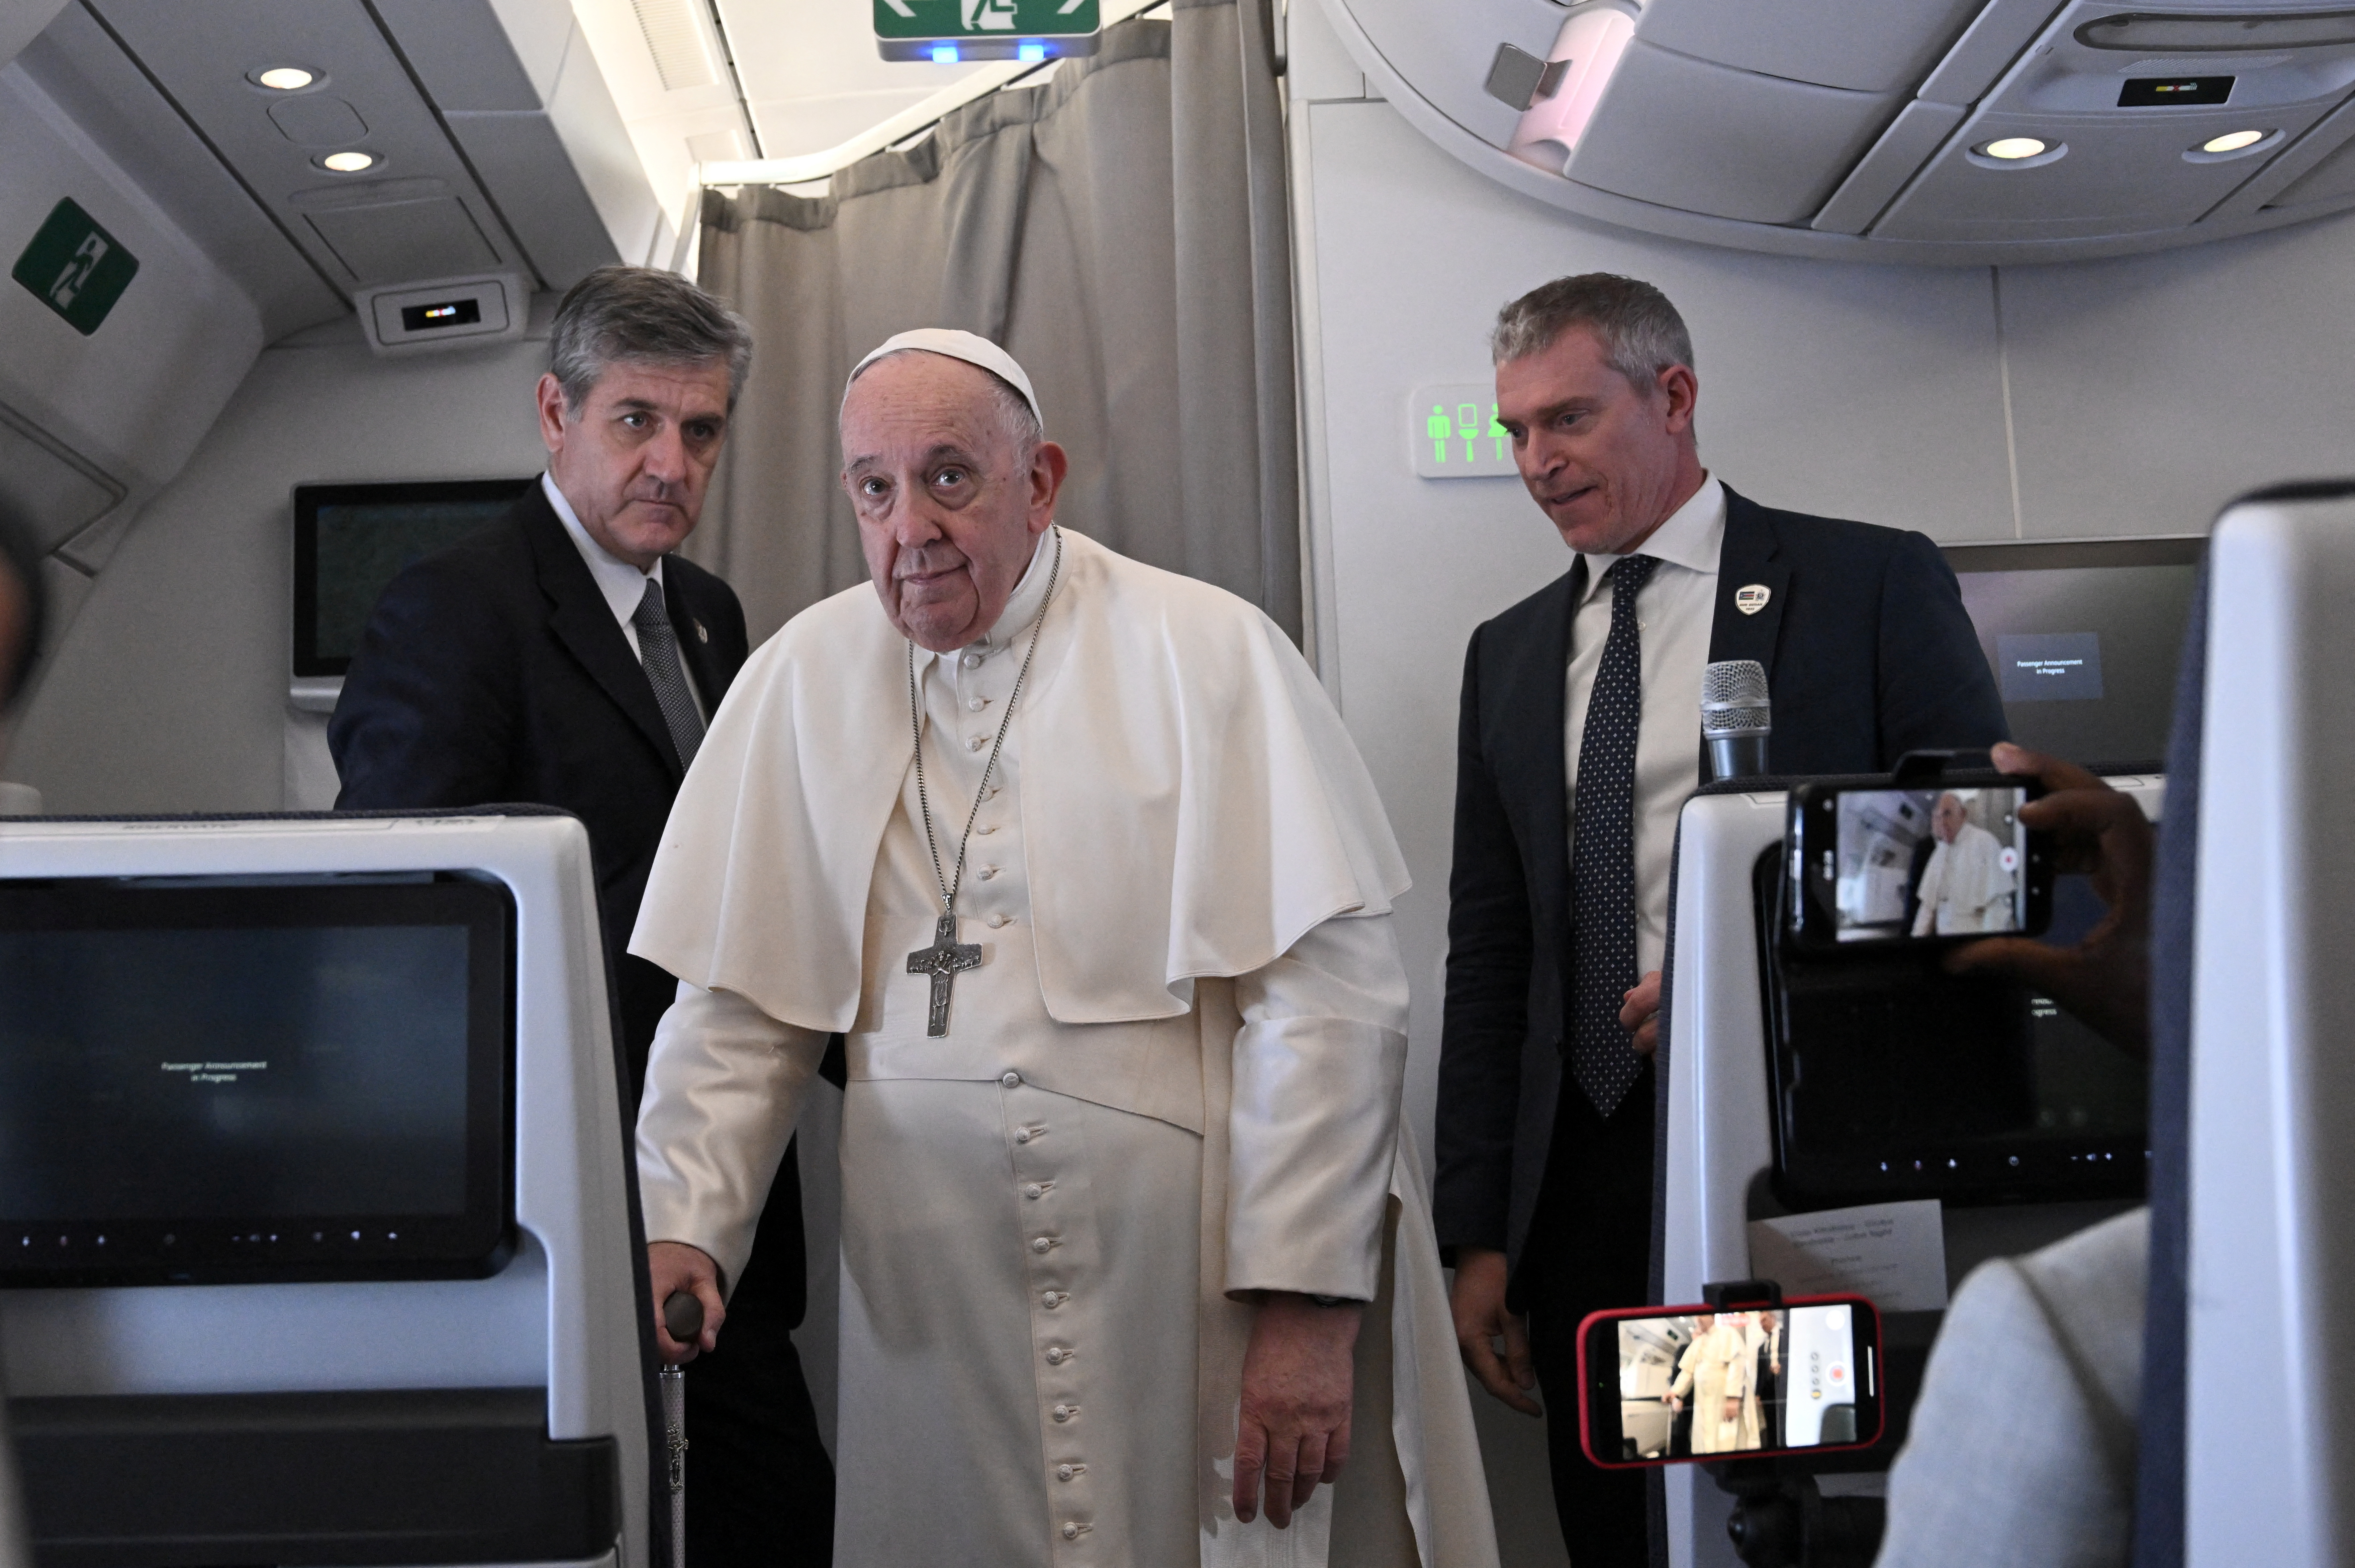 Pope Francis returns from his visit to Democratic Republic of Congo and South Sudan